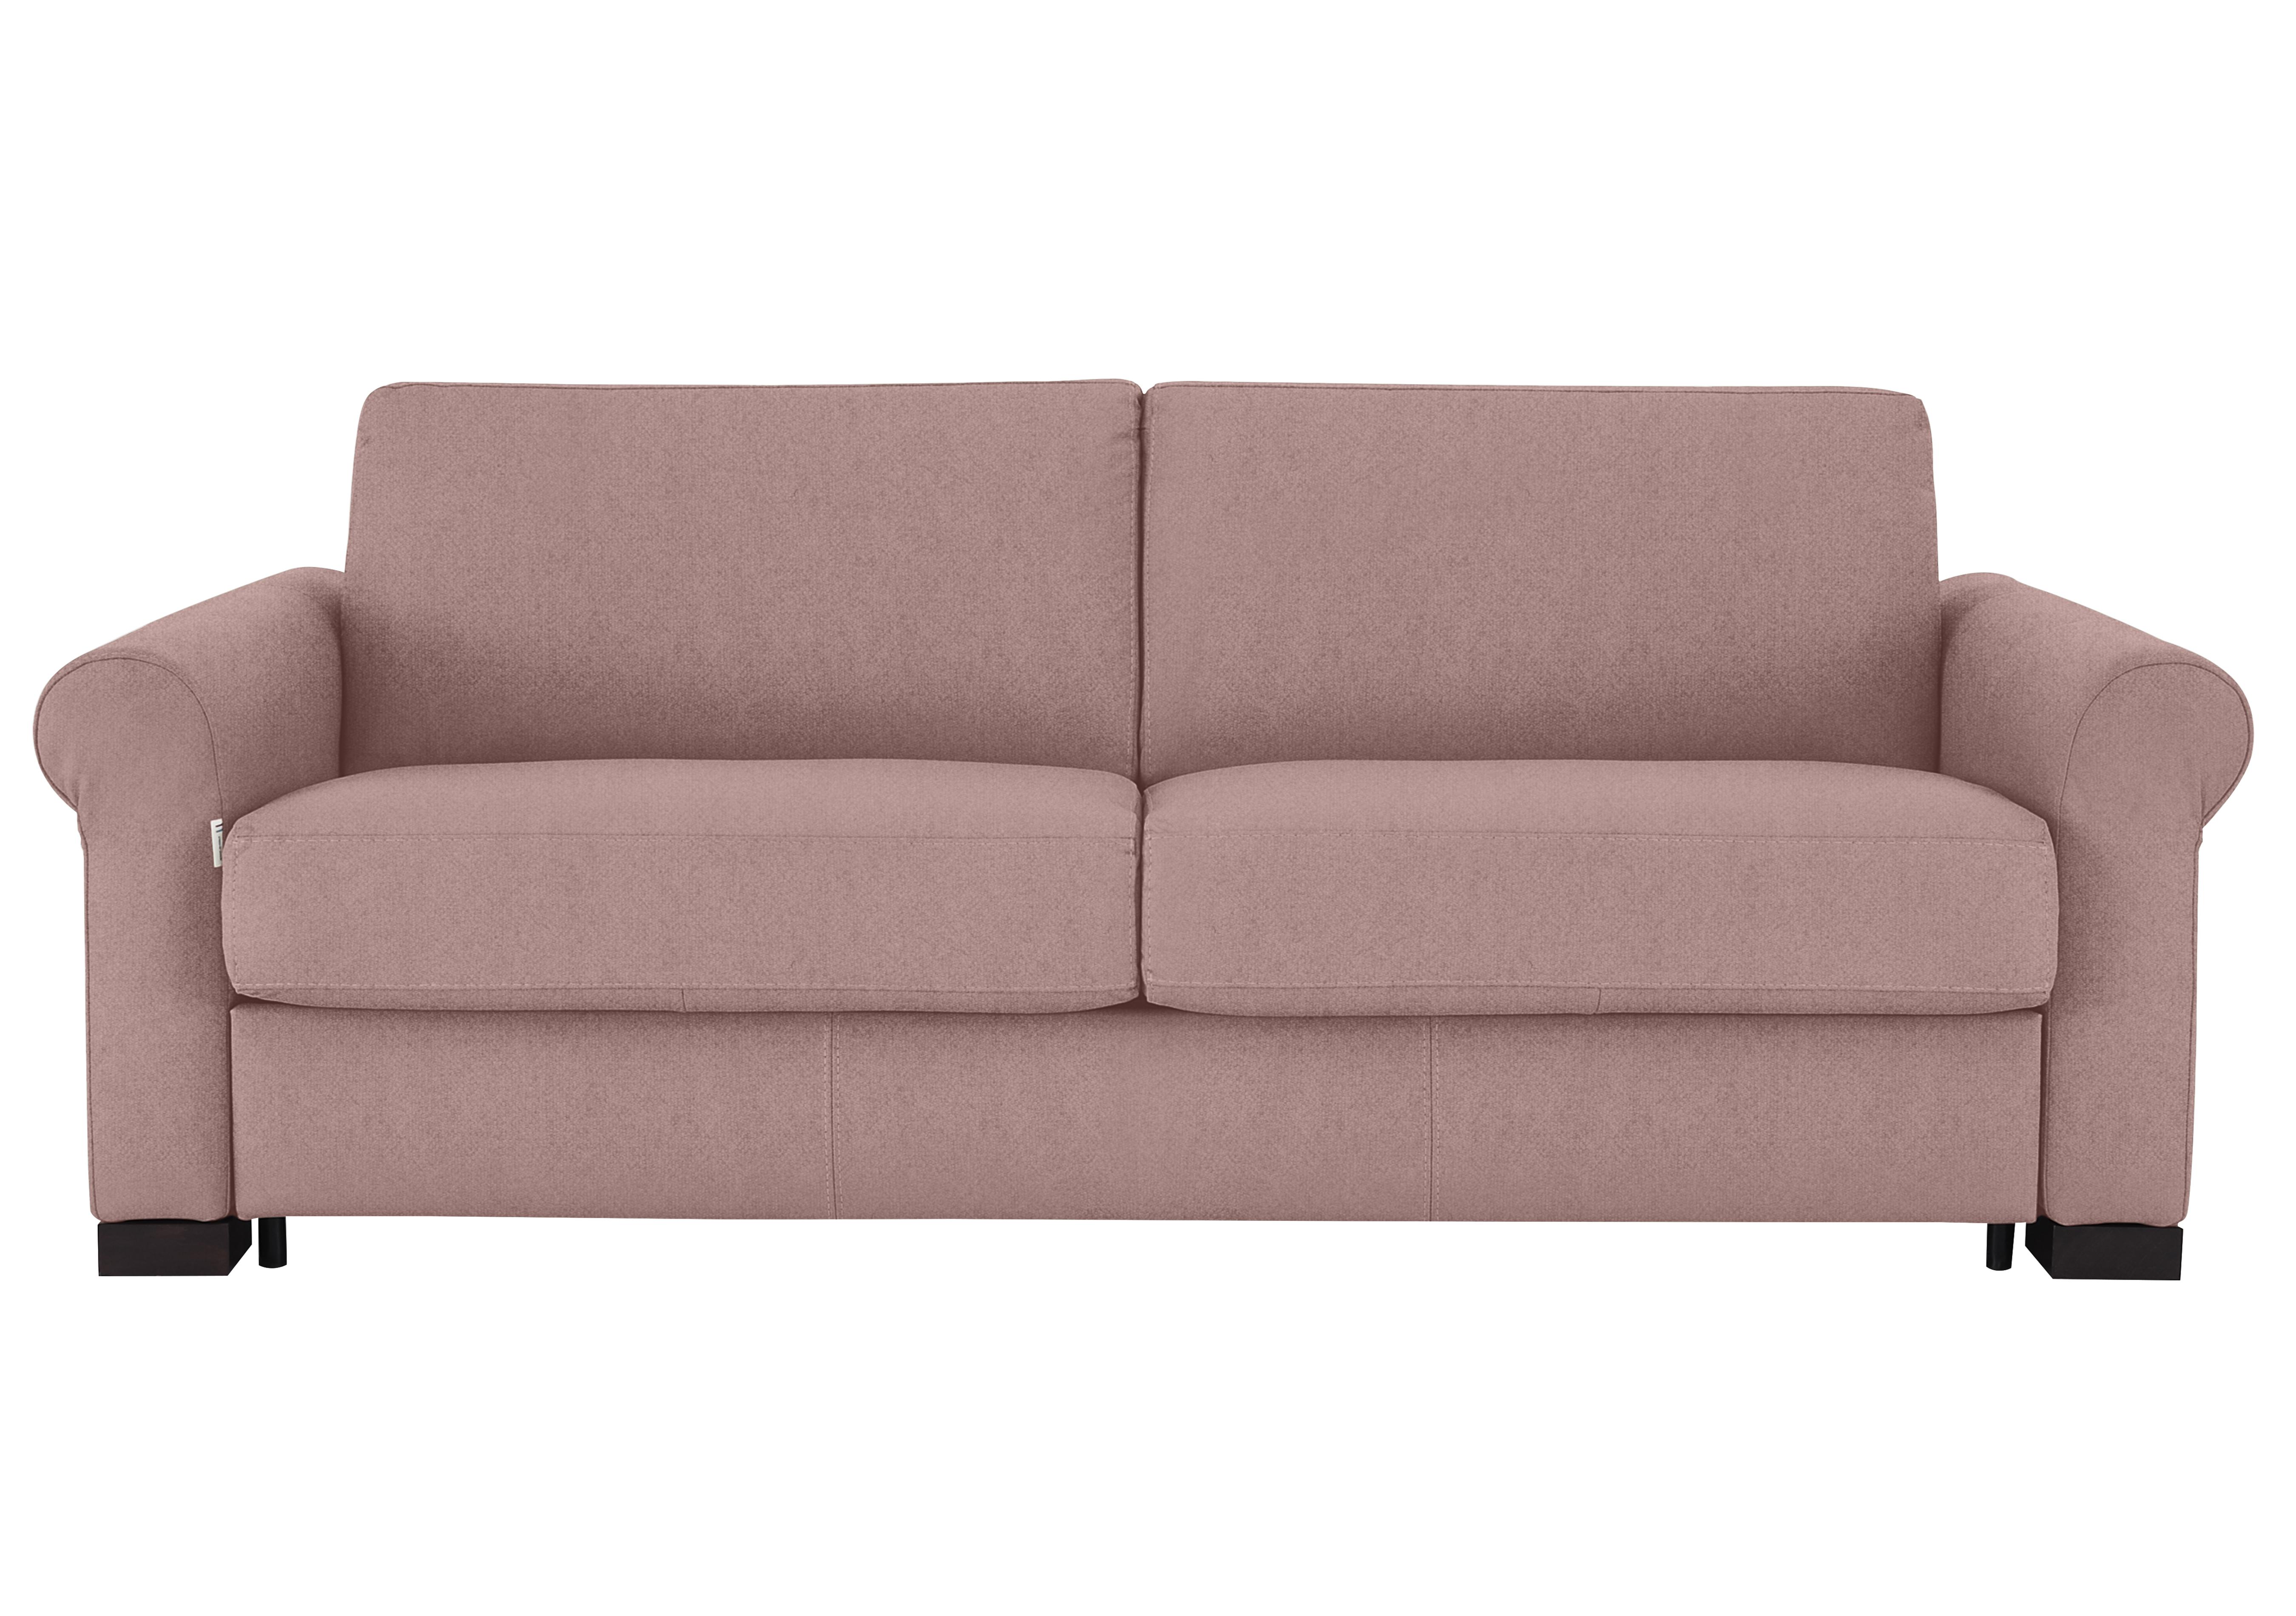 Alcova 3 Seater Fabric Sofa Bed with Scroll Arms in Fuente Coral on Furniture Village